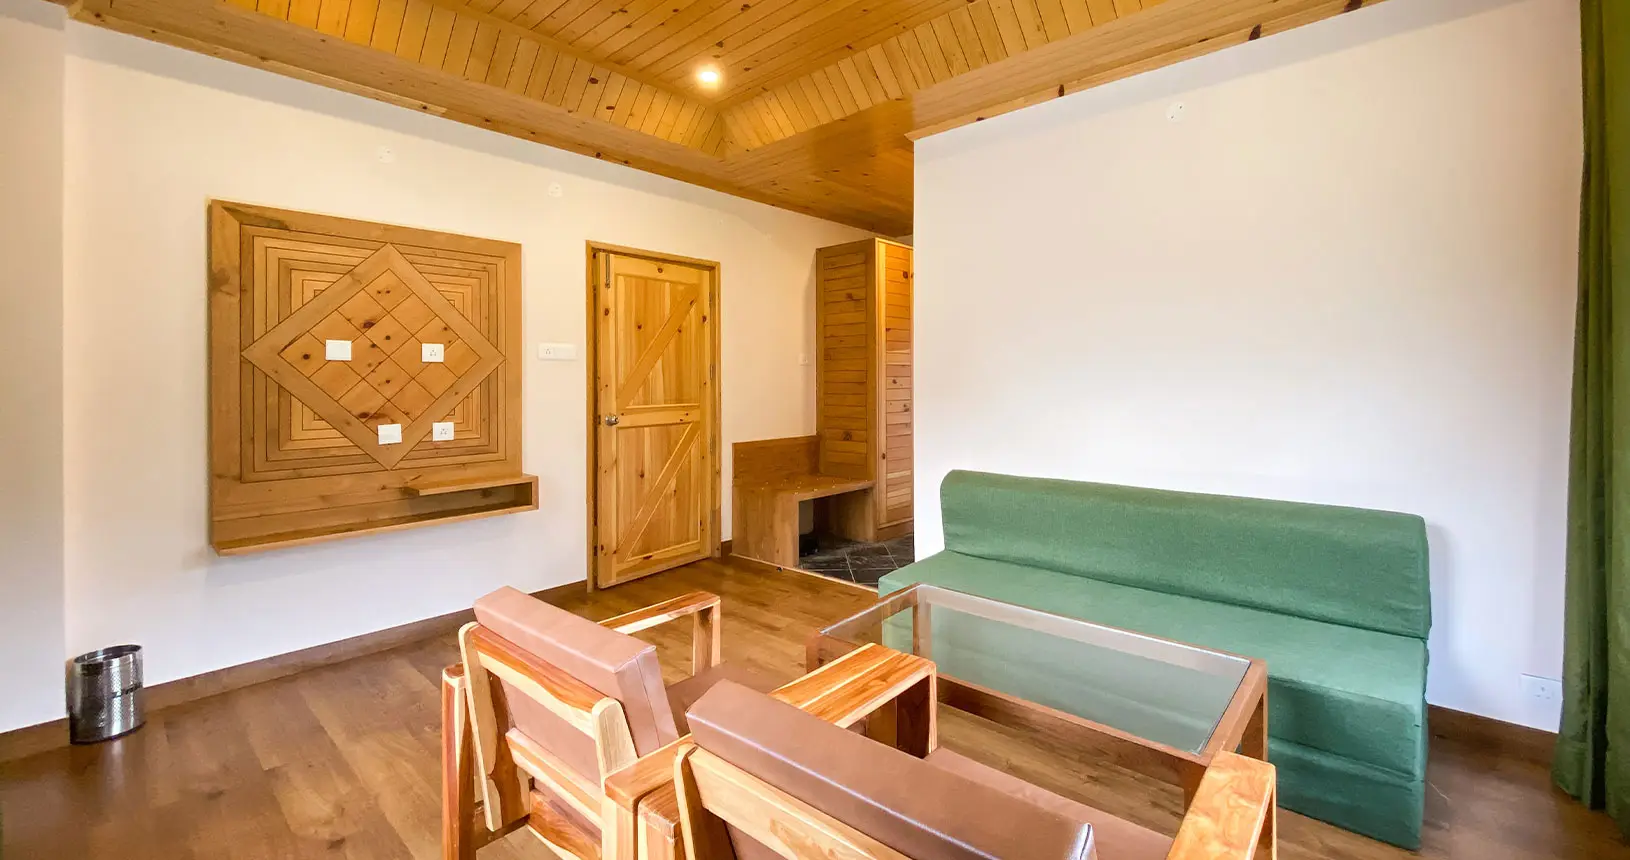 Seating area and entrance of the family suite at Hotel Batseri, Sangla.